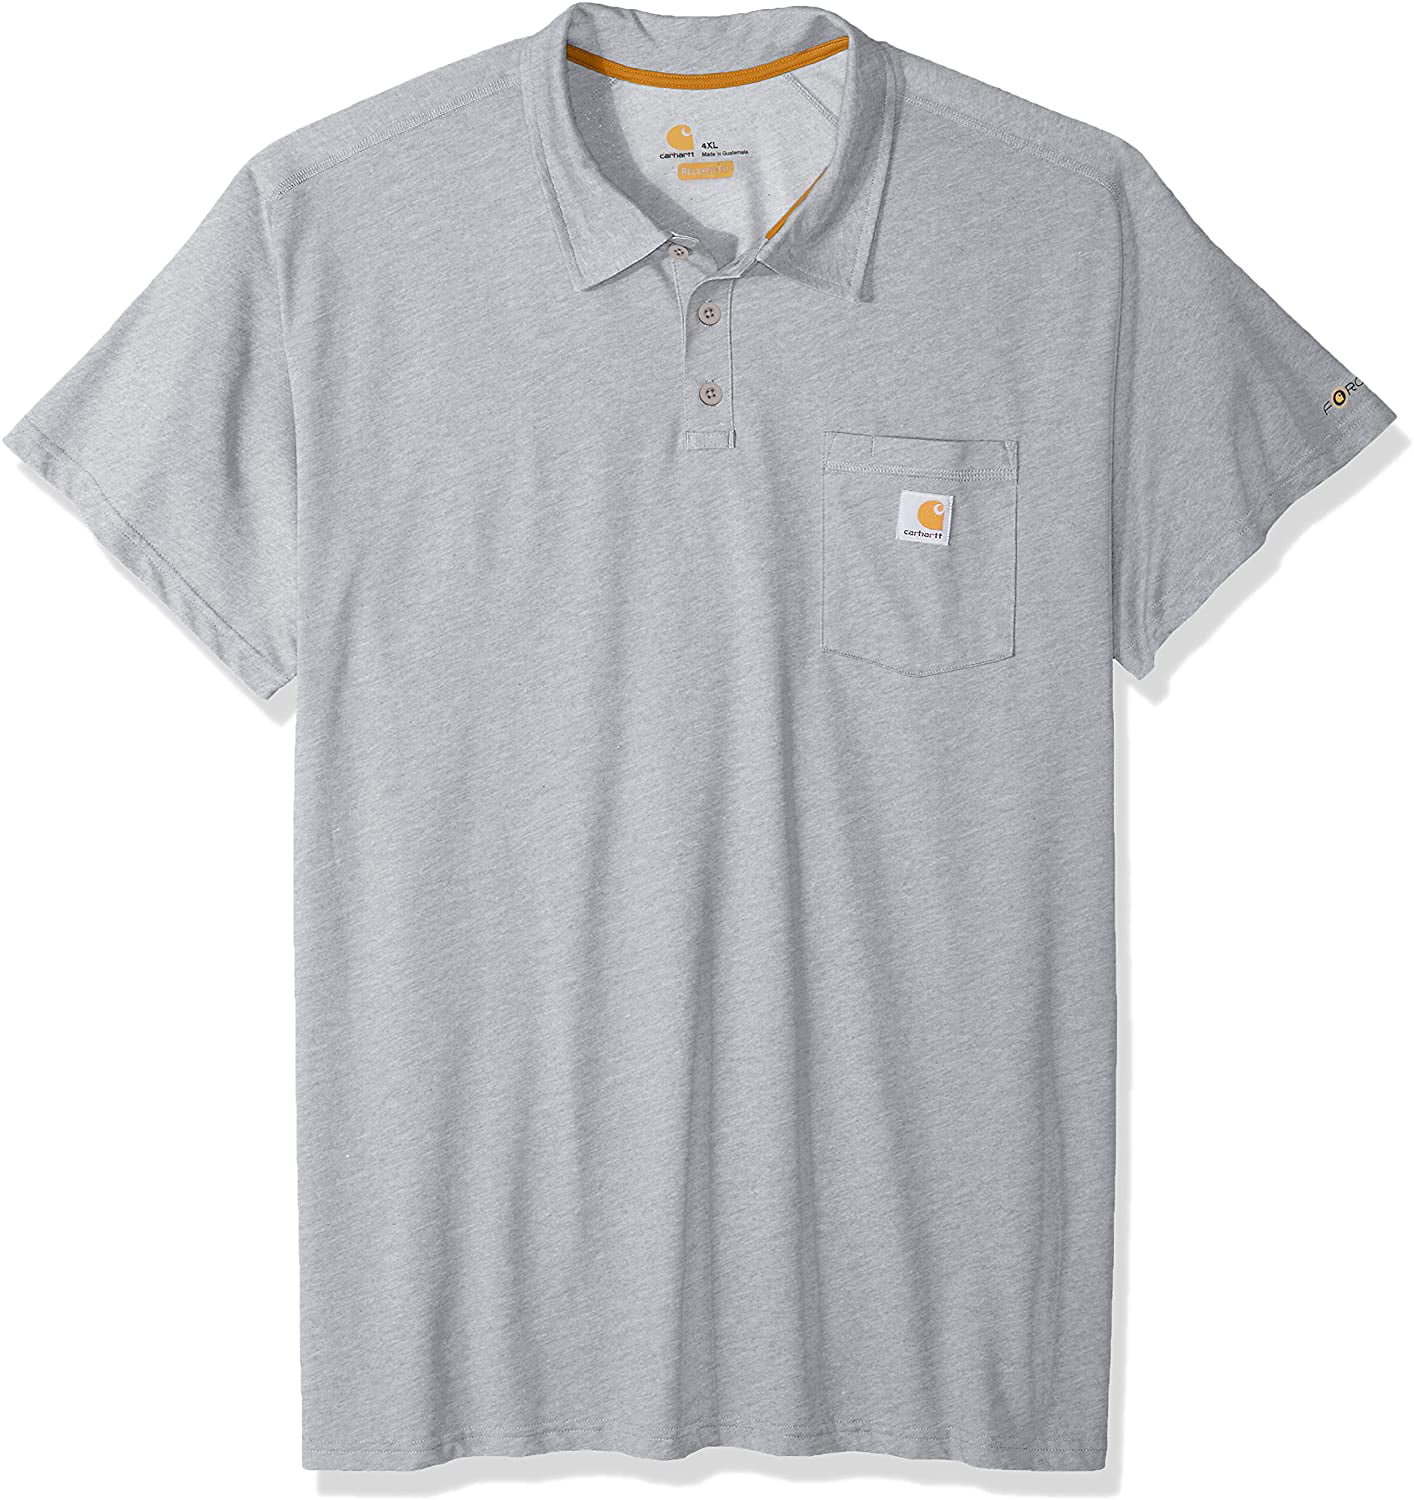 Carhartt Men's Force Cotton Delmont Pocket Polo (Regular and Big & Tall ...